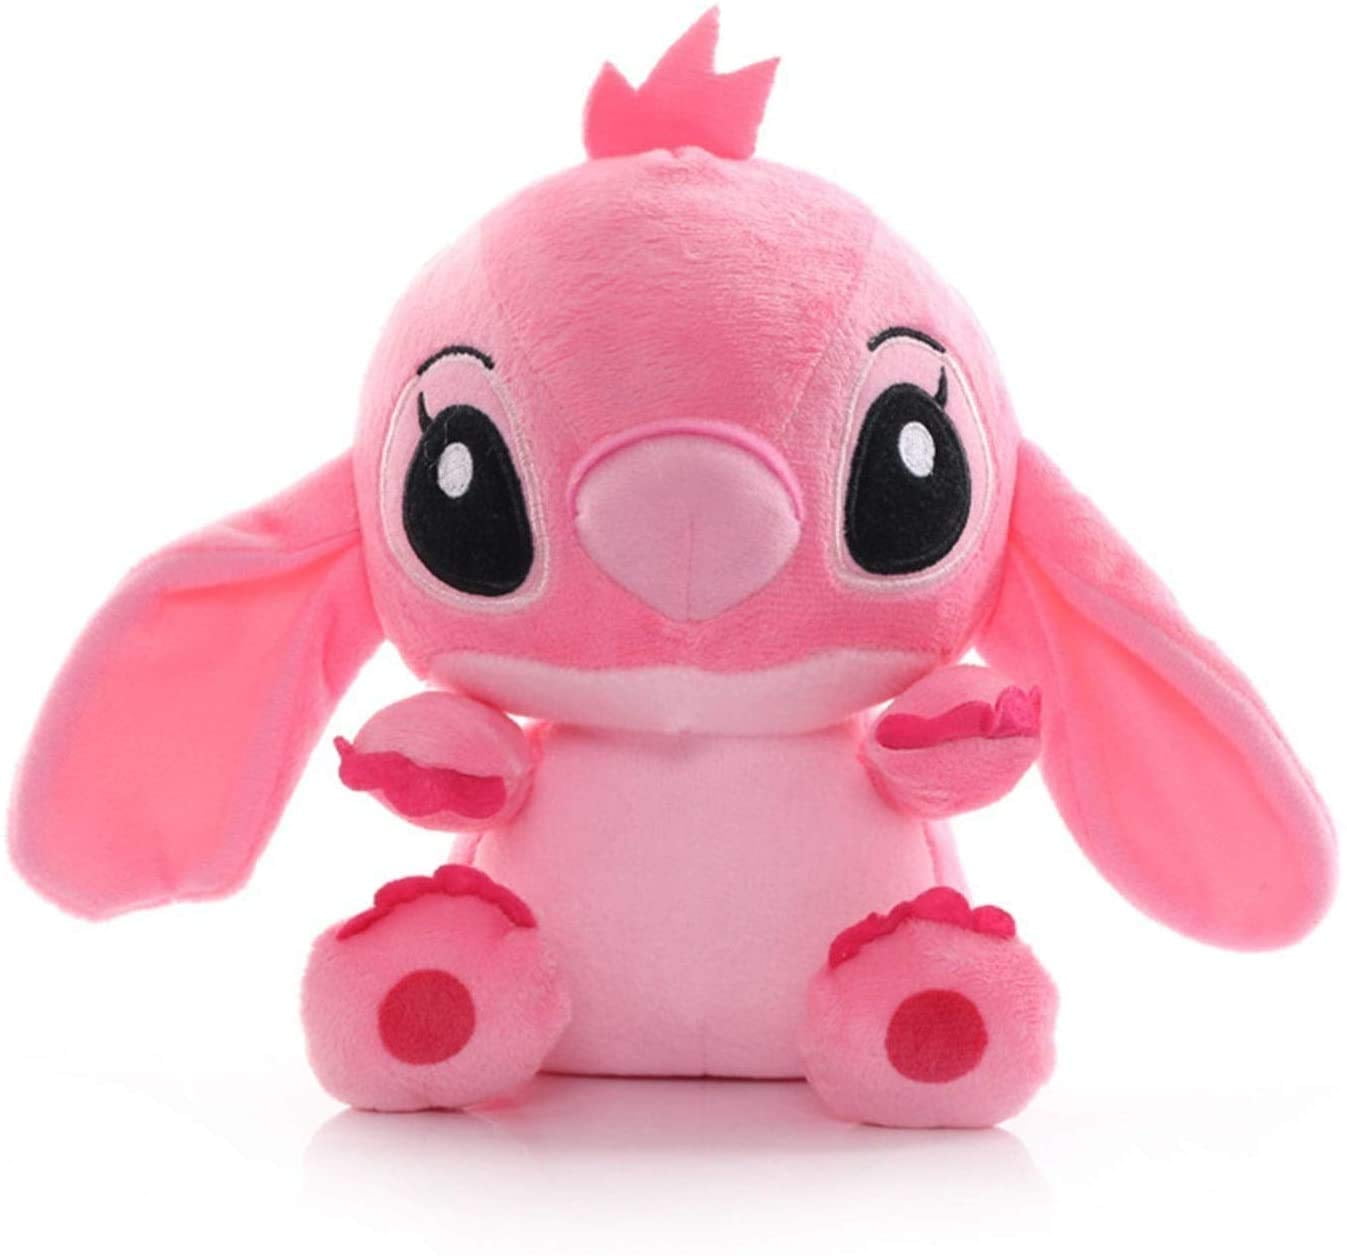 Cute Plush Cartoon Lilo and Cross Stitch Stitch Plush Toys 10cm, Plush Animal Gifts for Teenagers and Girls, Size: 10 cm, Angel